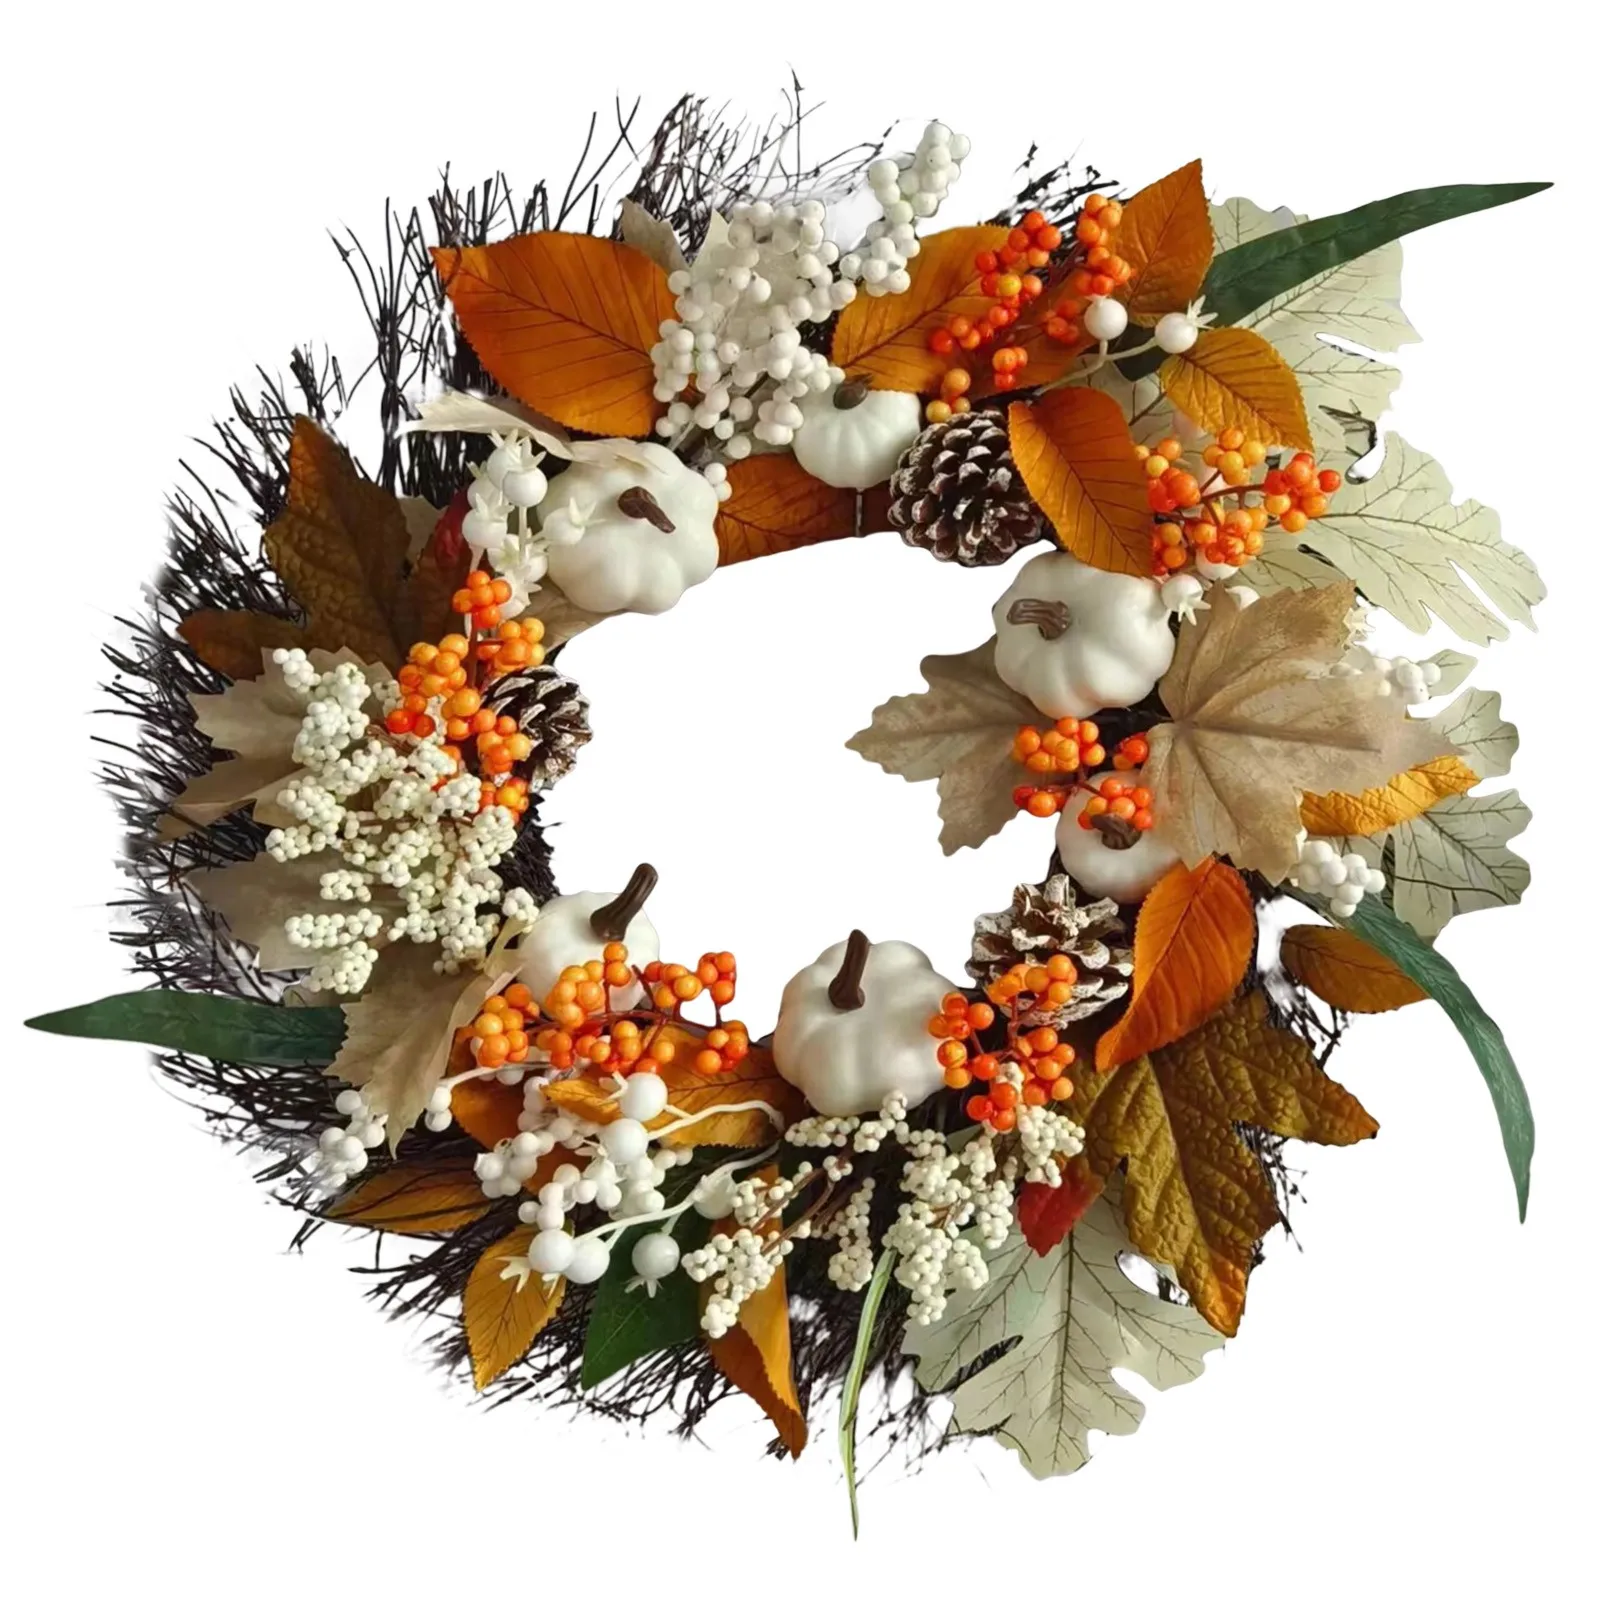 

Fall Wreaths For Front Door Autumn Wreath With Berry Pumpkin Maple Leaves Thanksgiving Harvest Festival Decoration Door Garland